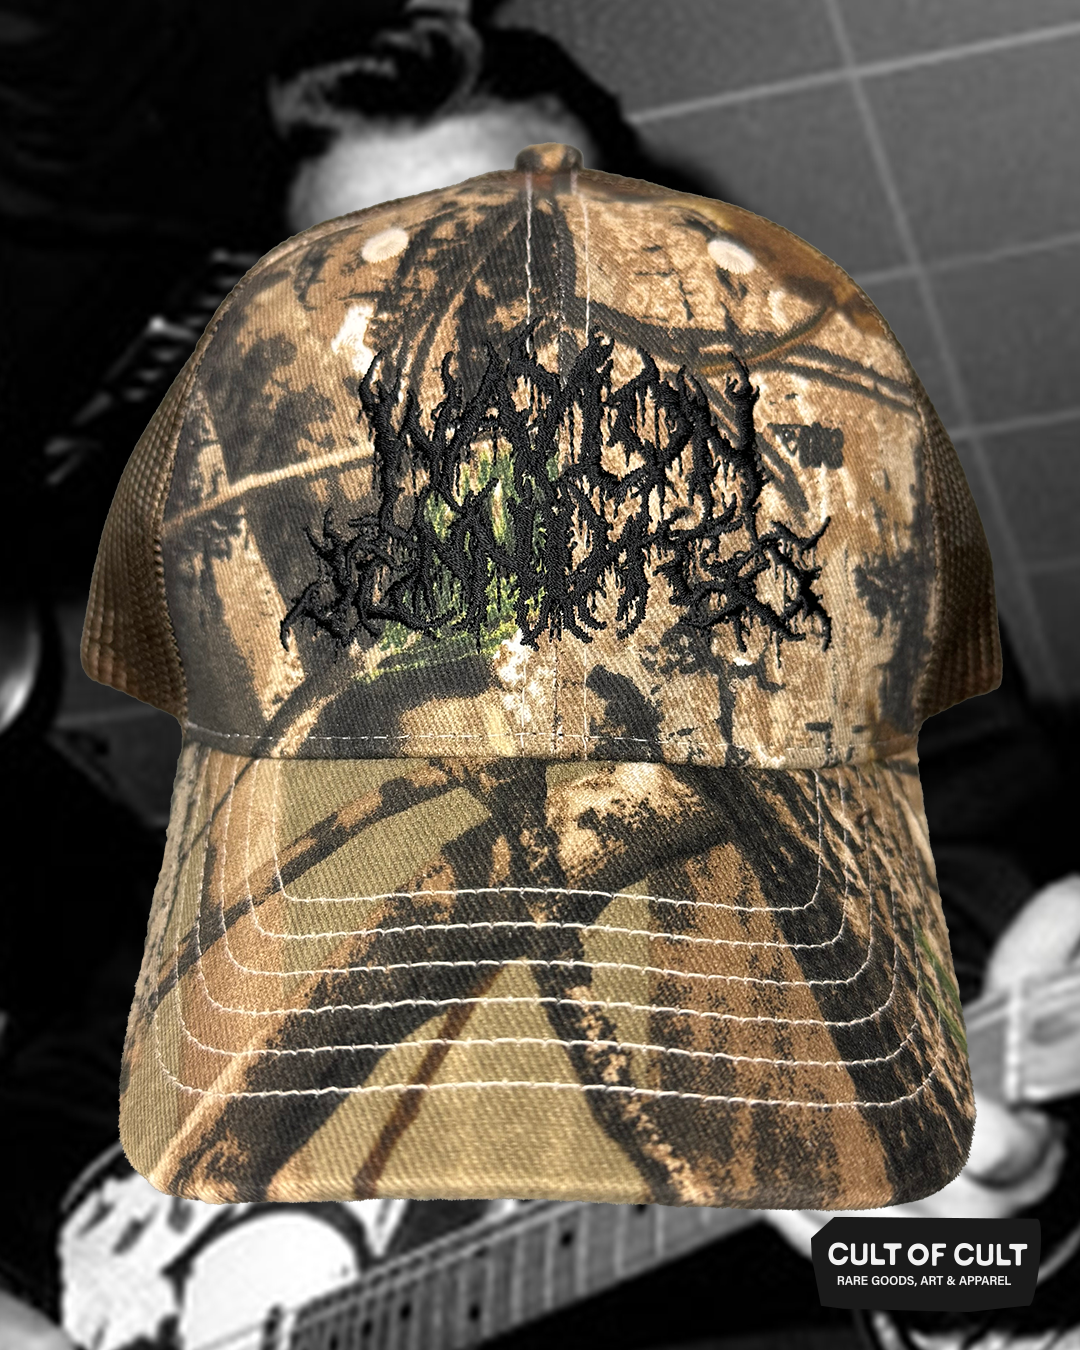 The front of the black and brown Waylon Jennings trucker hat